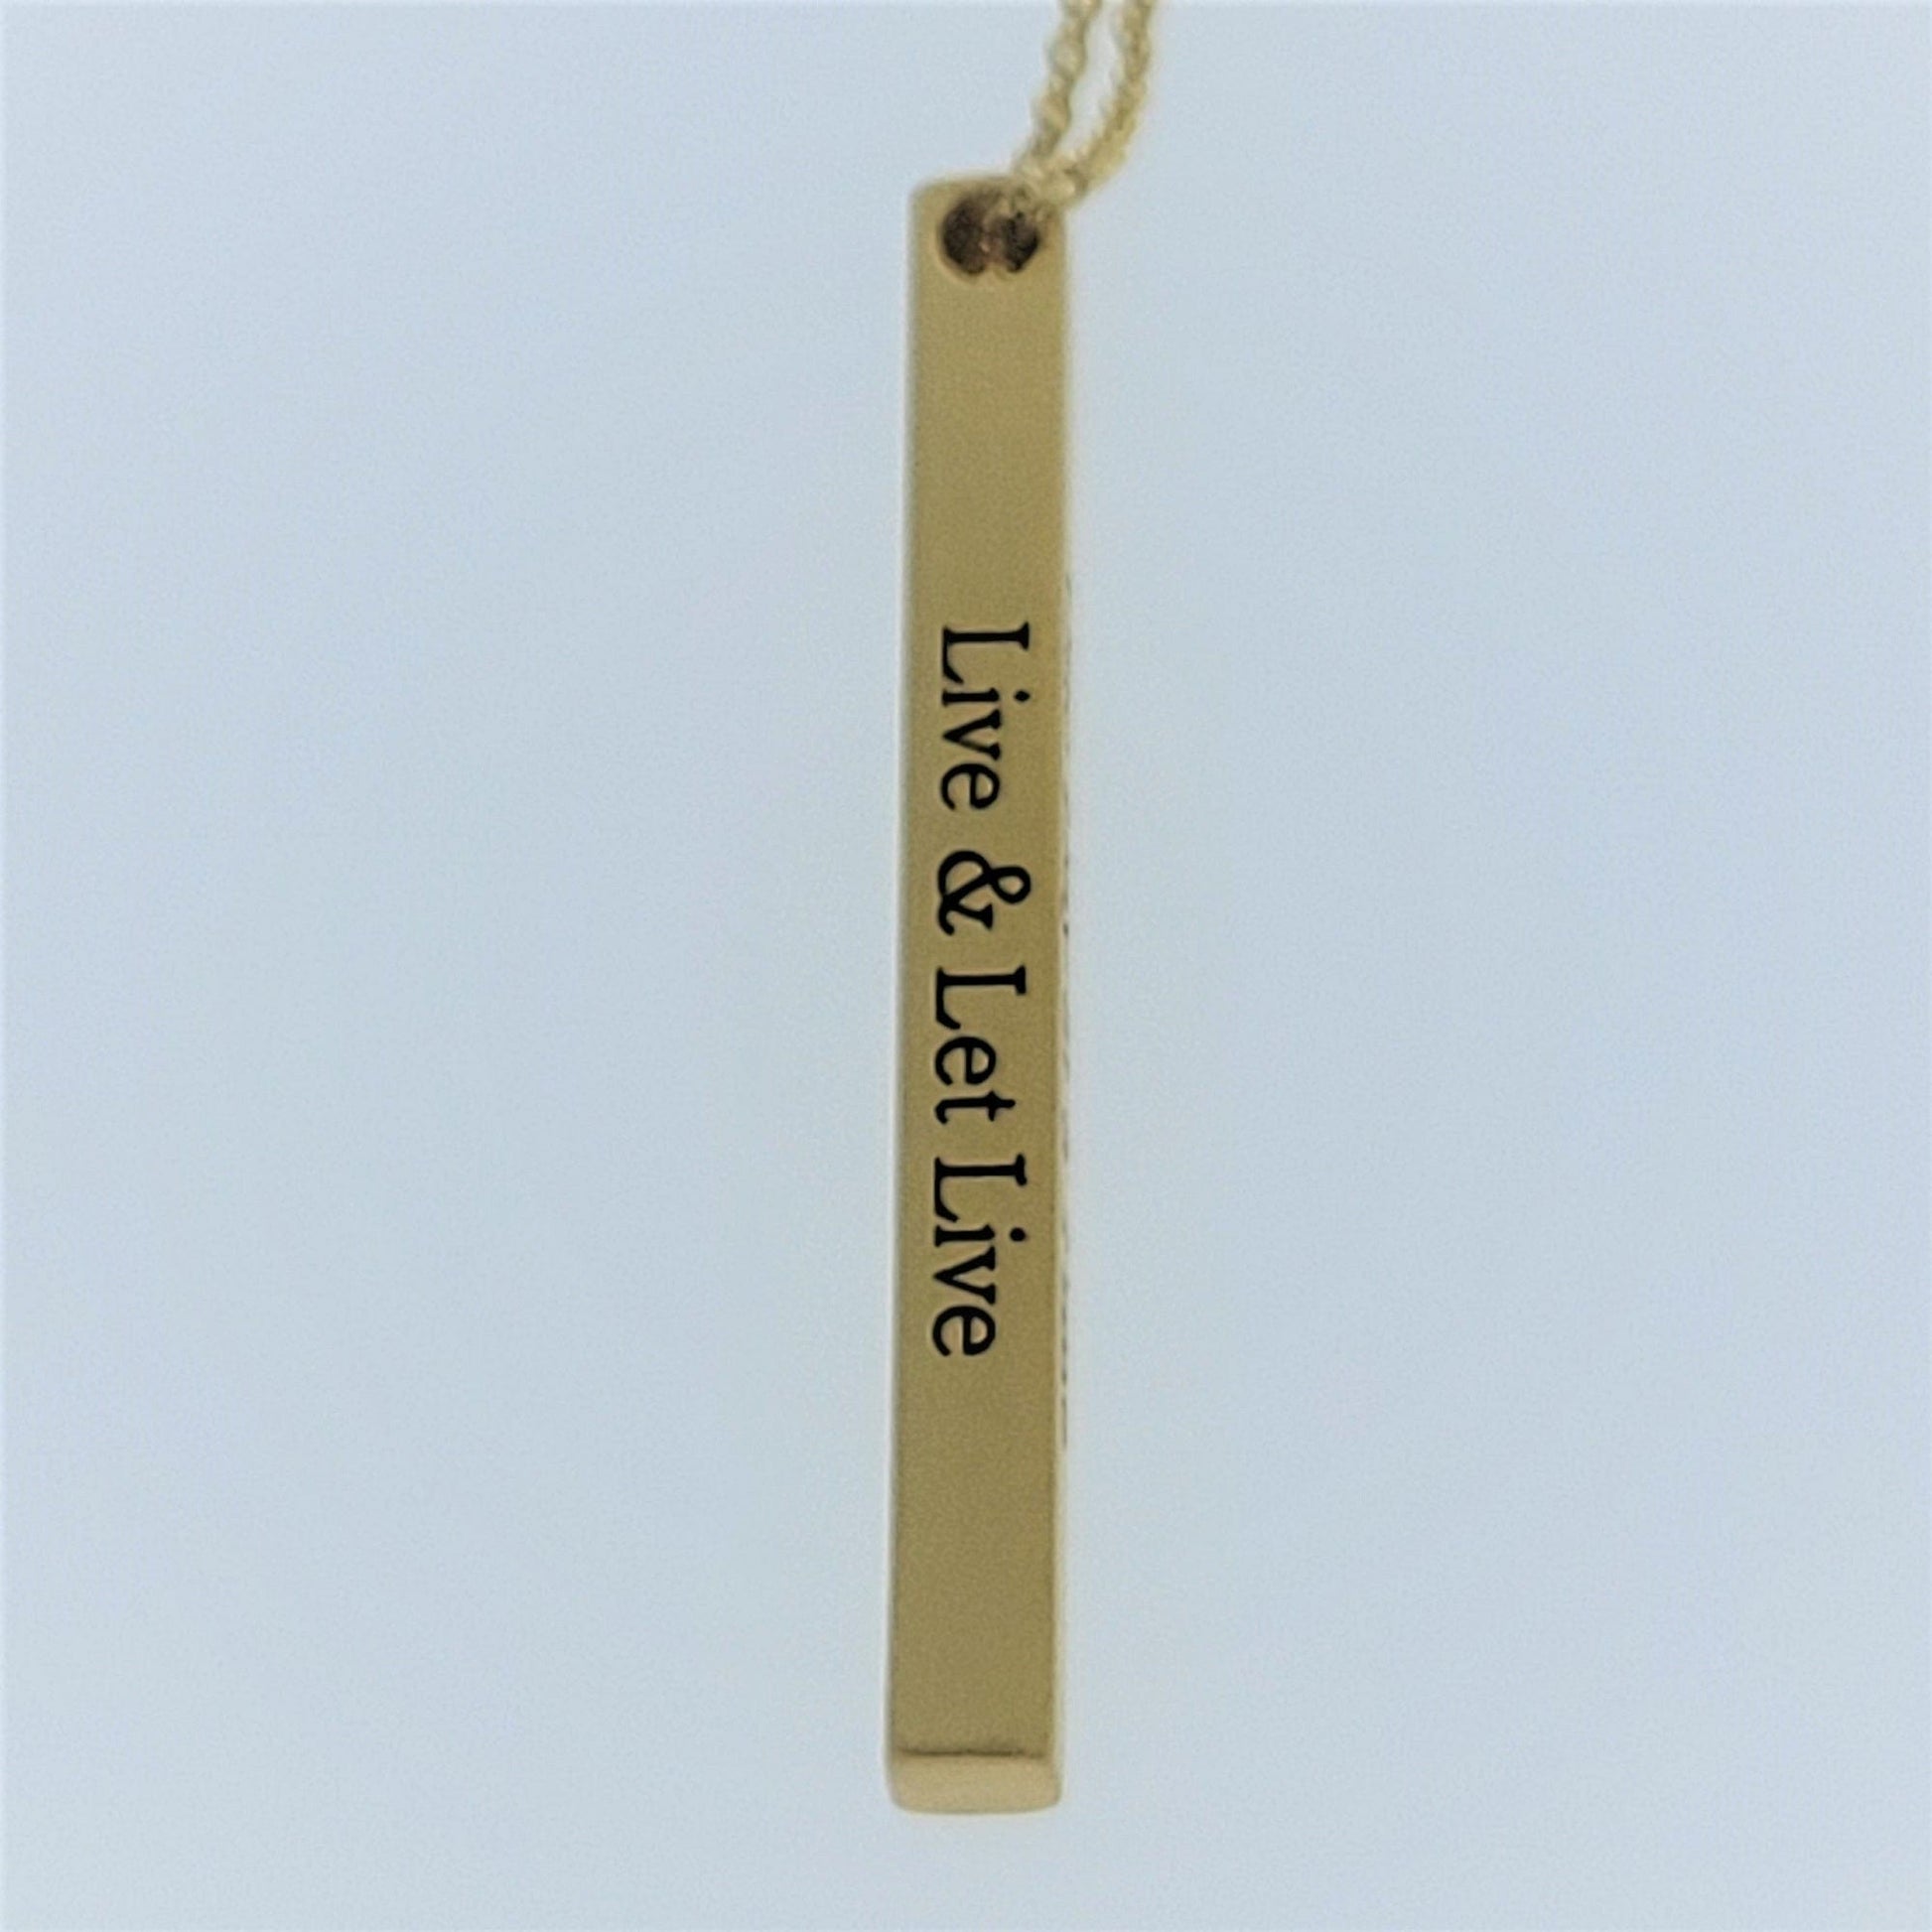 Slogans To Live By Bar Necklace By Recovery Matters